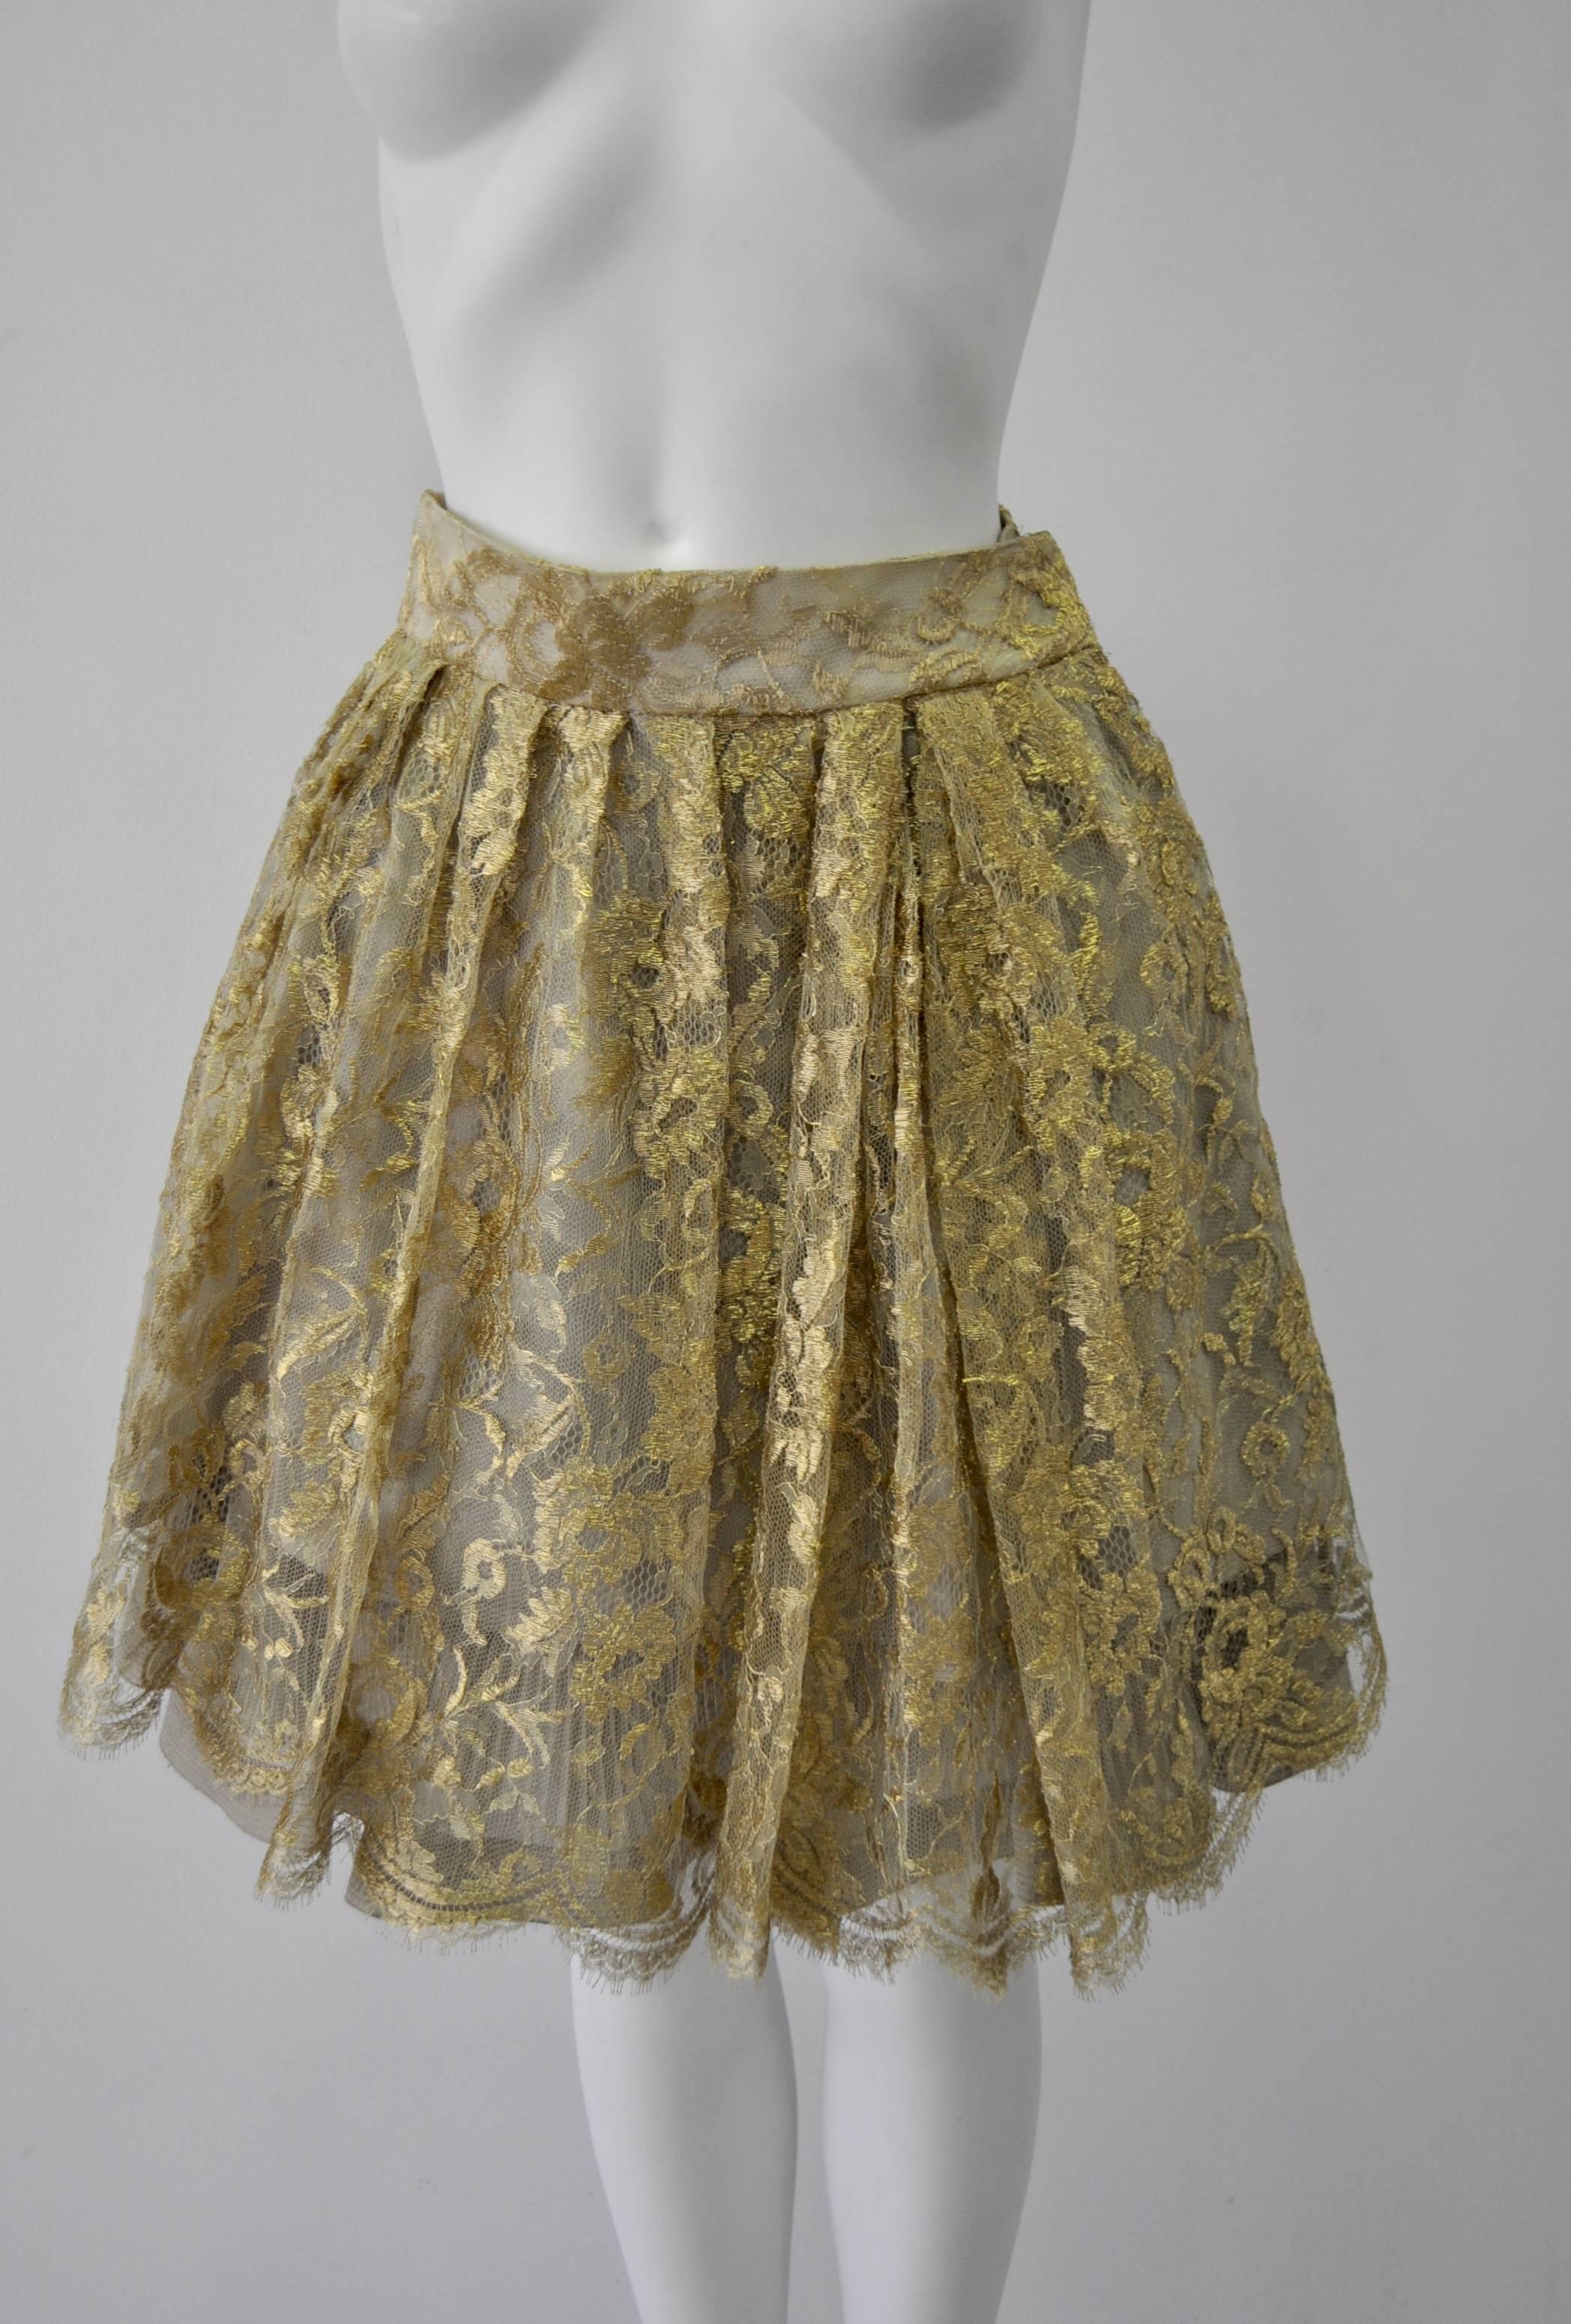 Brown Exceptional Gianni Versace Couture Multi-Tier Flounce Gold Lace Skirt For Sale